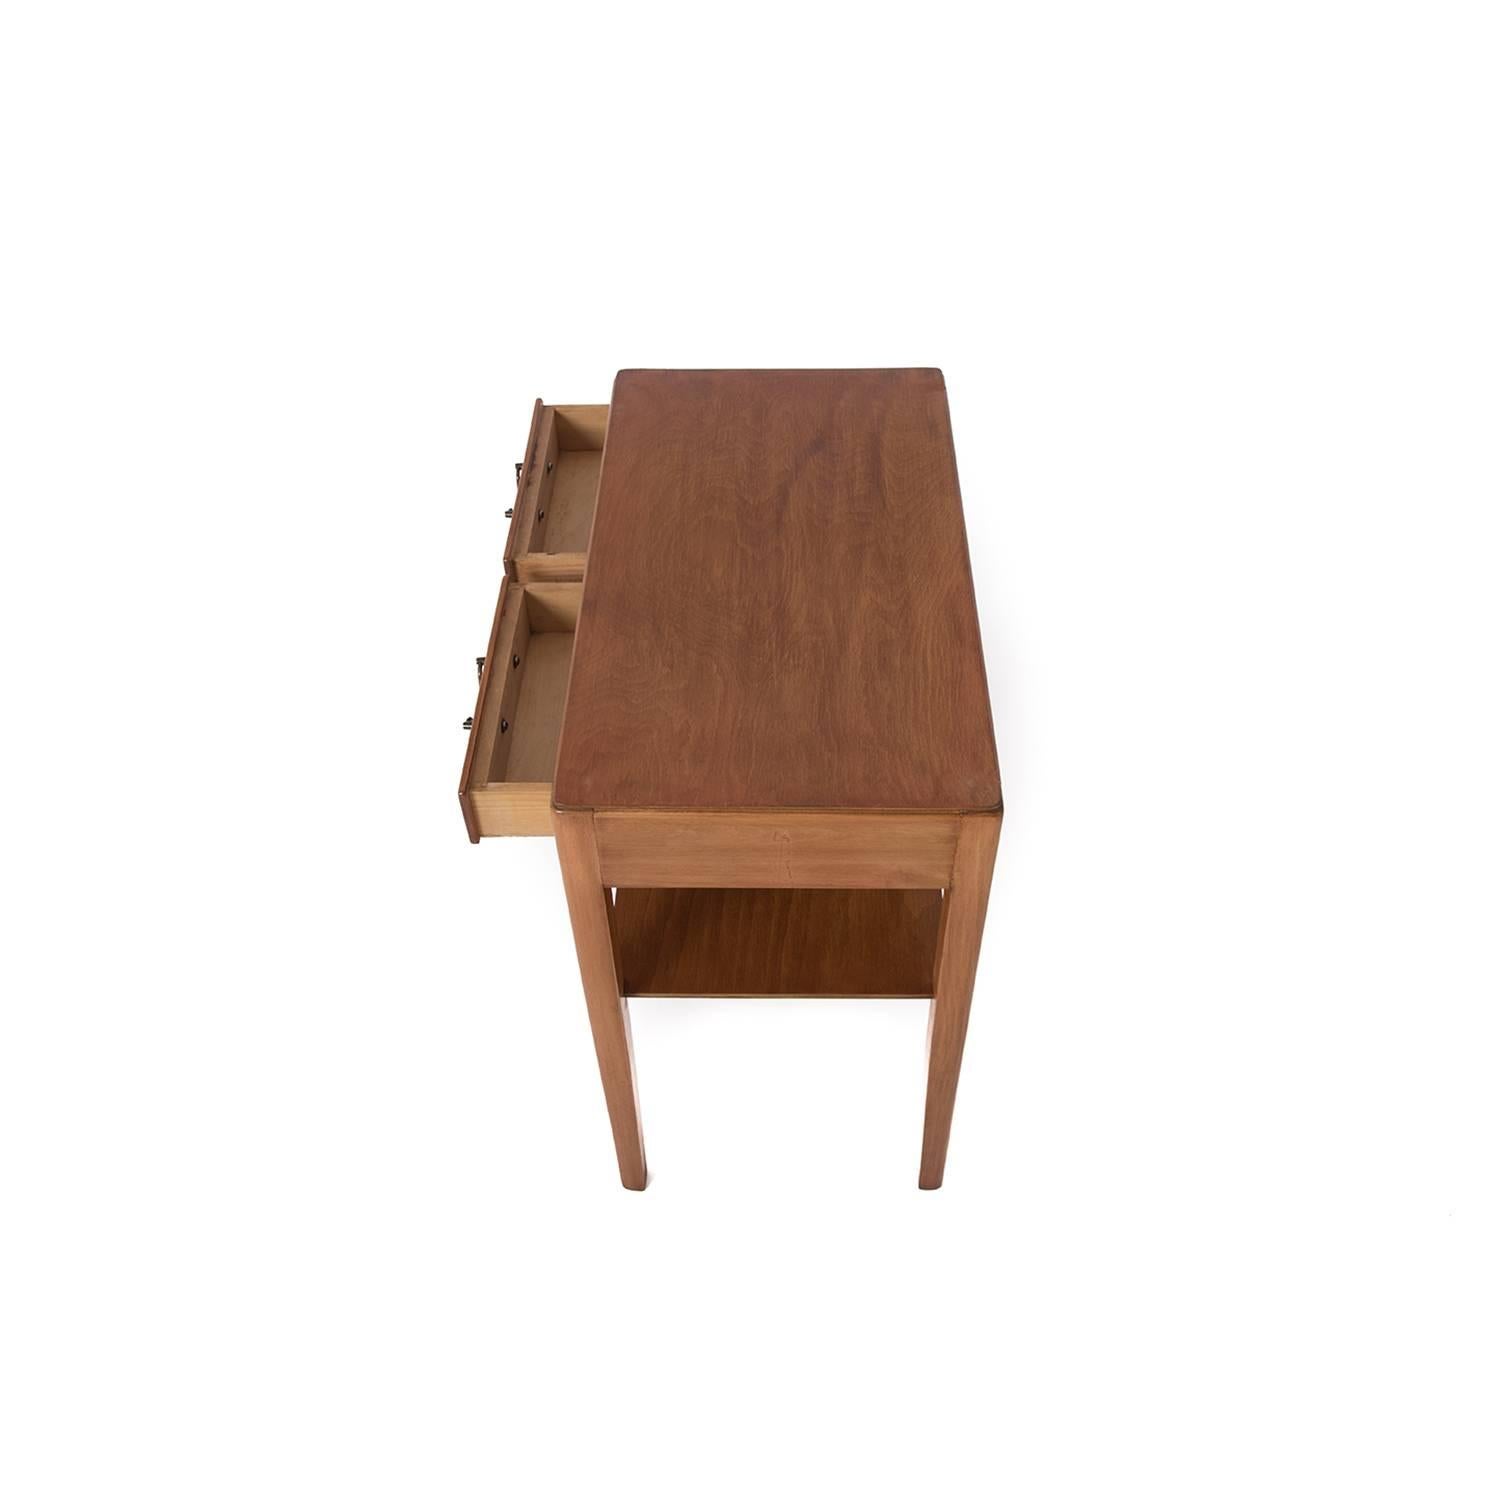 20th Century Danish Modern Mahogany Occasional Table with Drawers and Shelf